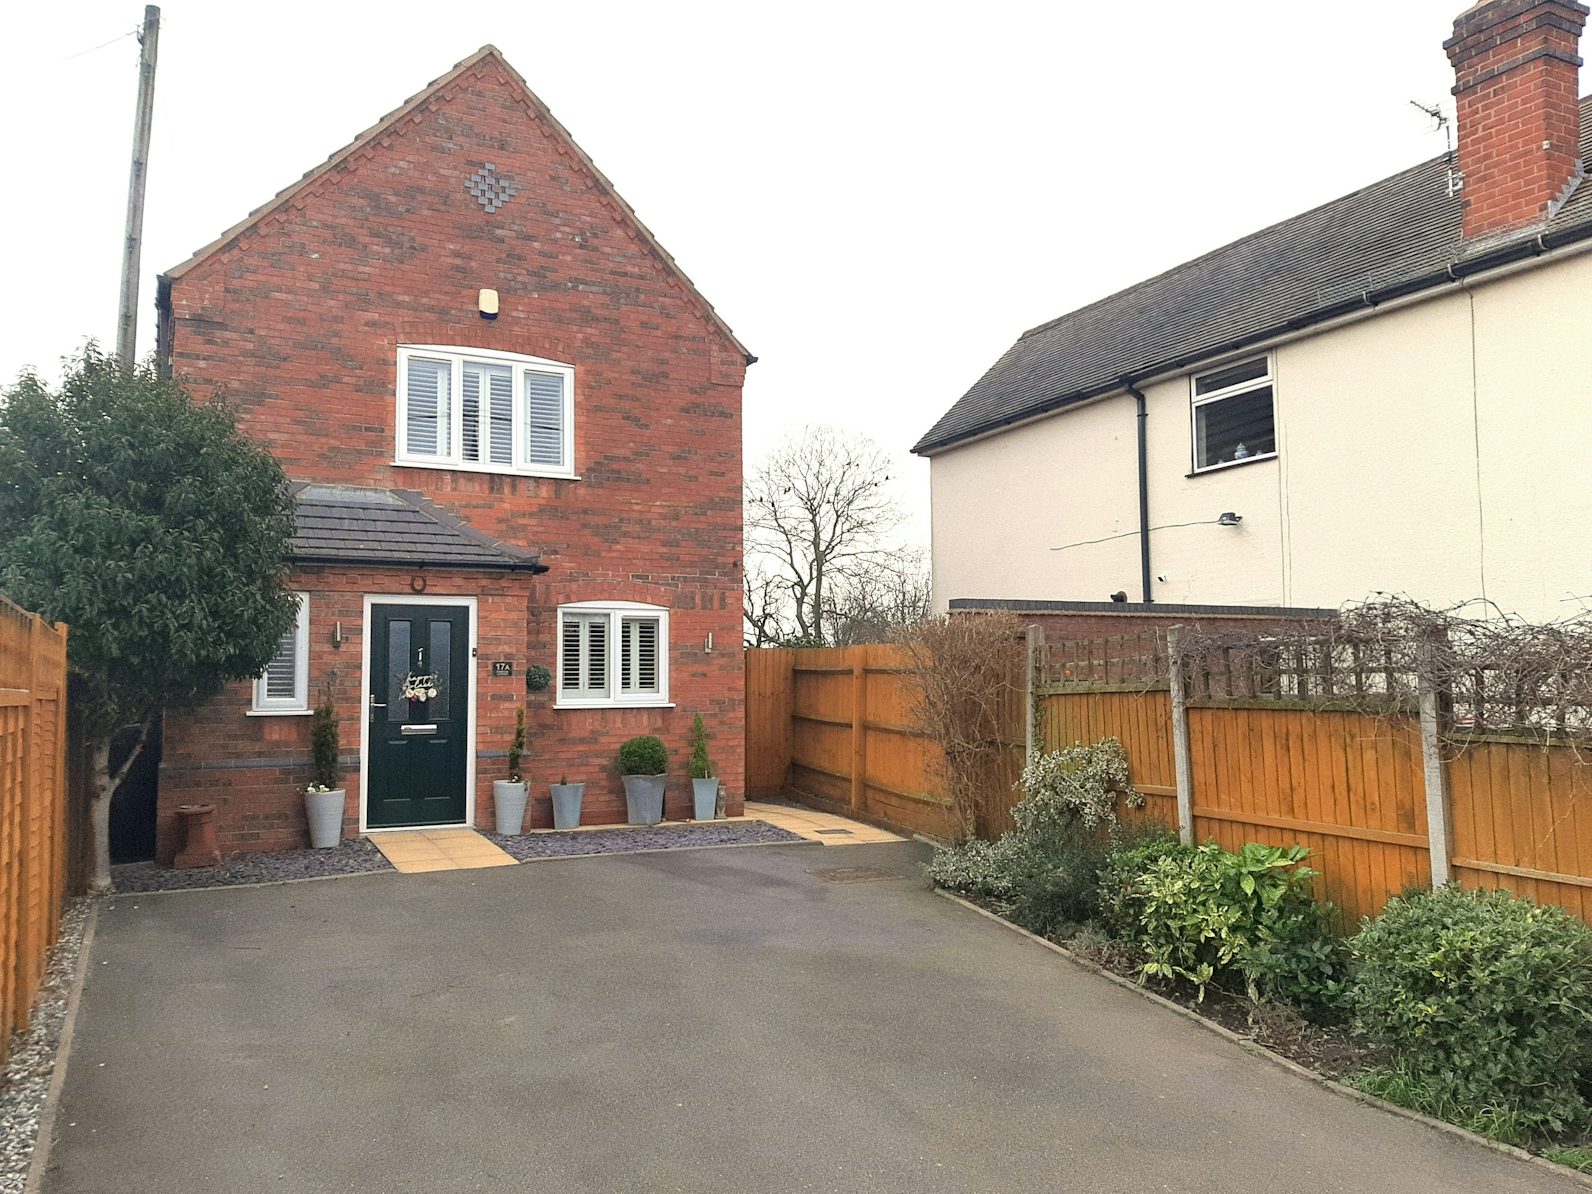 Detached House for sale on Tamworth Road Wood End, Atherstone, CV9